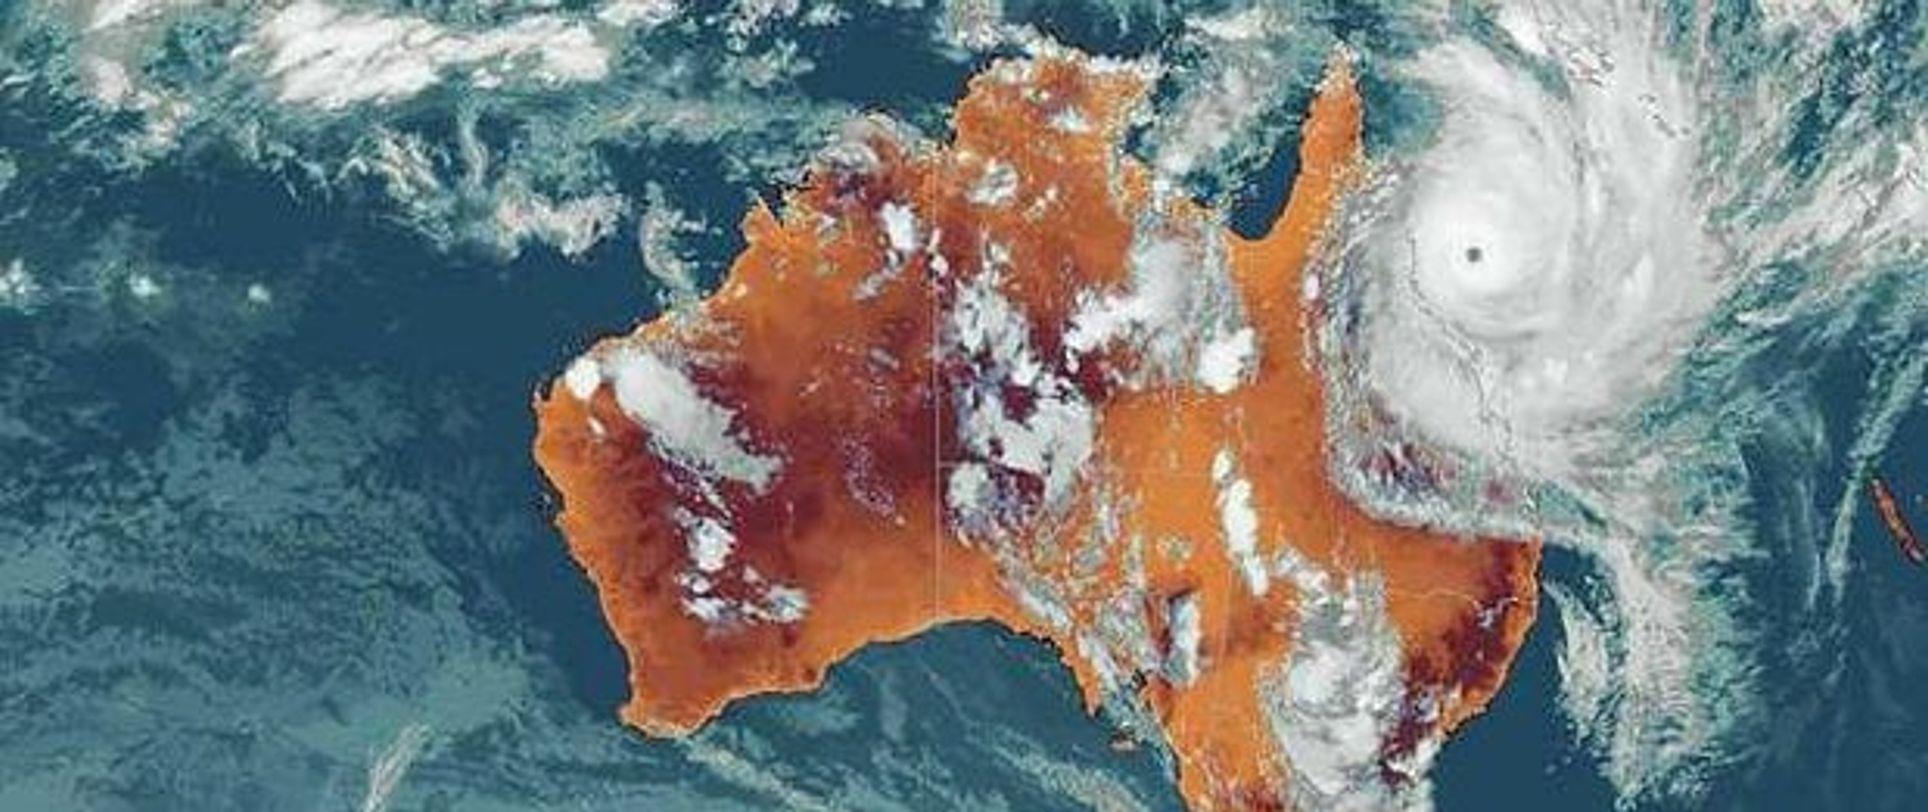 Cover Image for Tips to prepare when a cyclone warning has been issued 